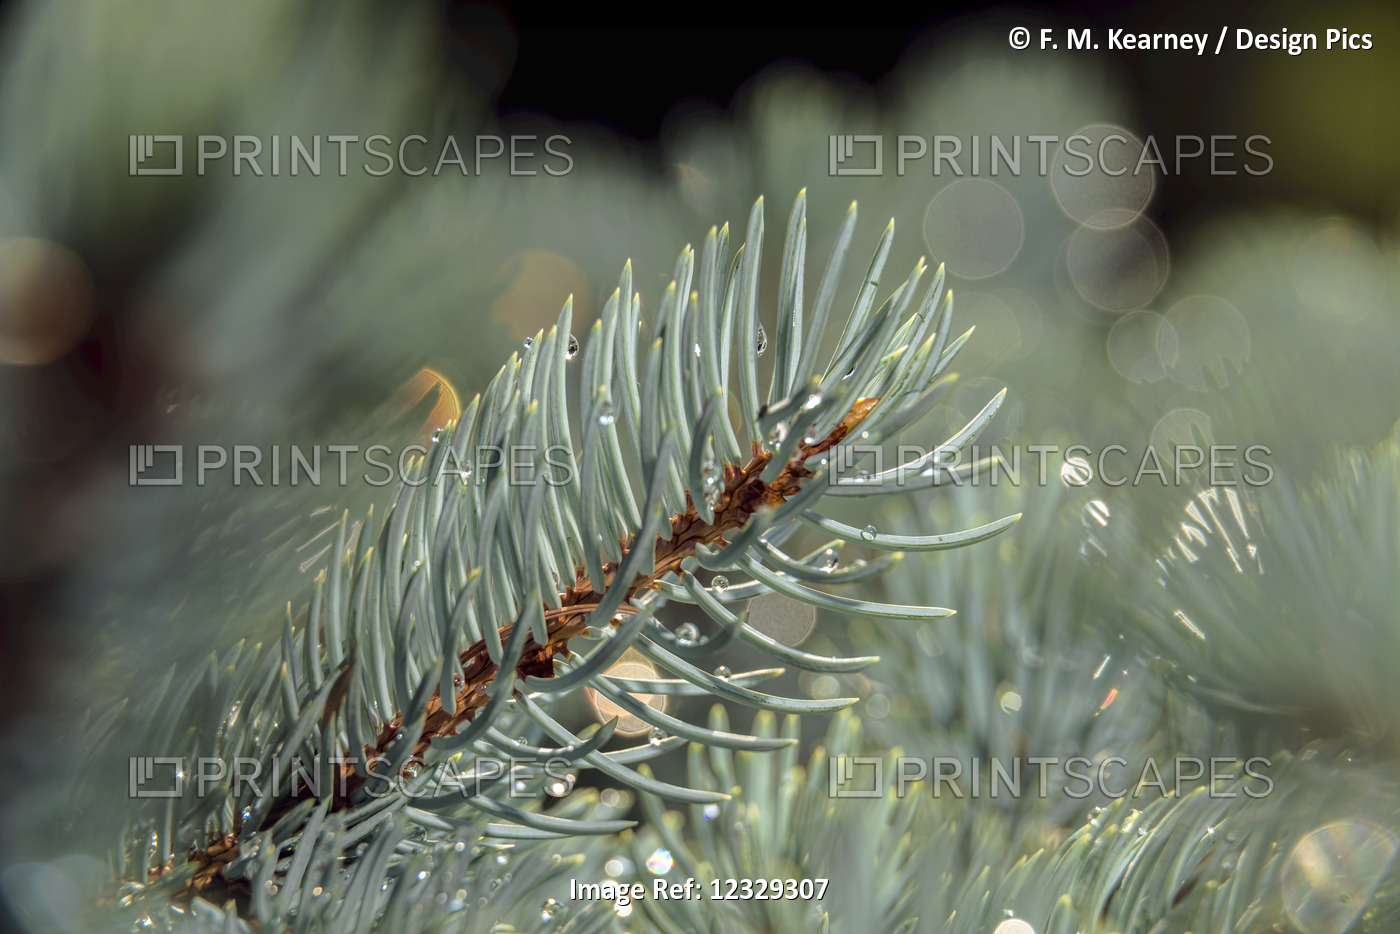 Blue Spruce Pine Needles (Pinaceae), 'moonsii' Picea Pungens, New York ...